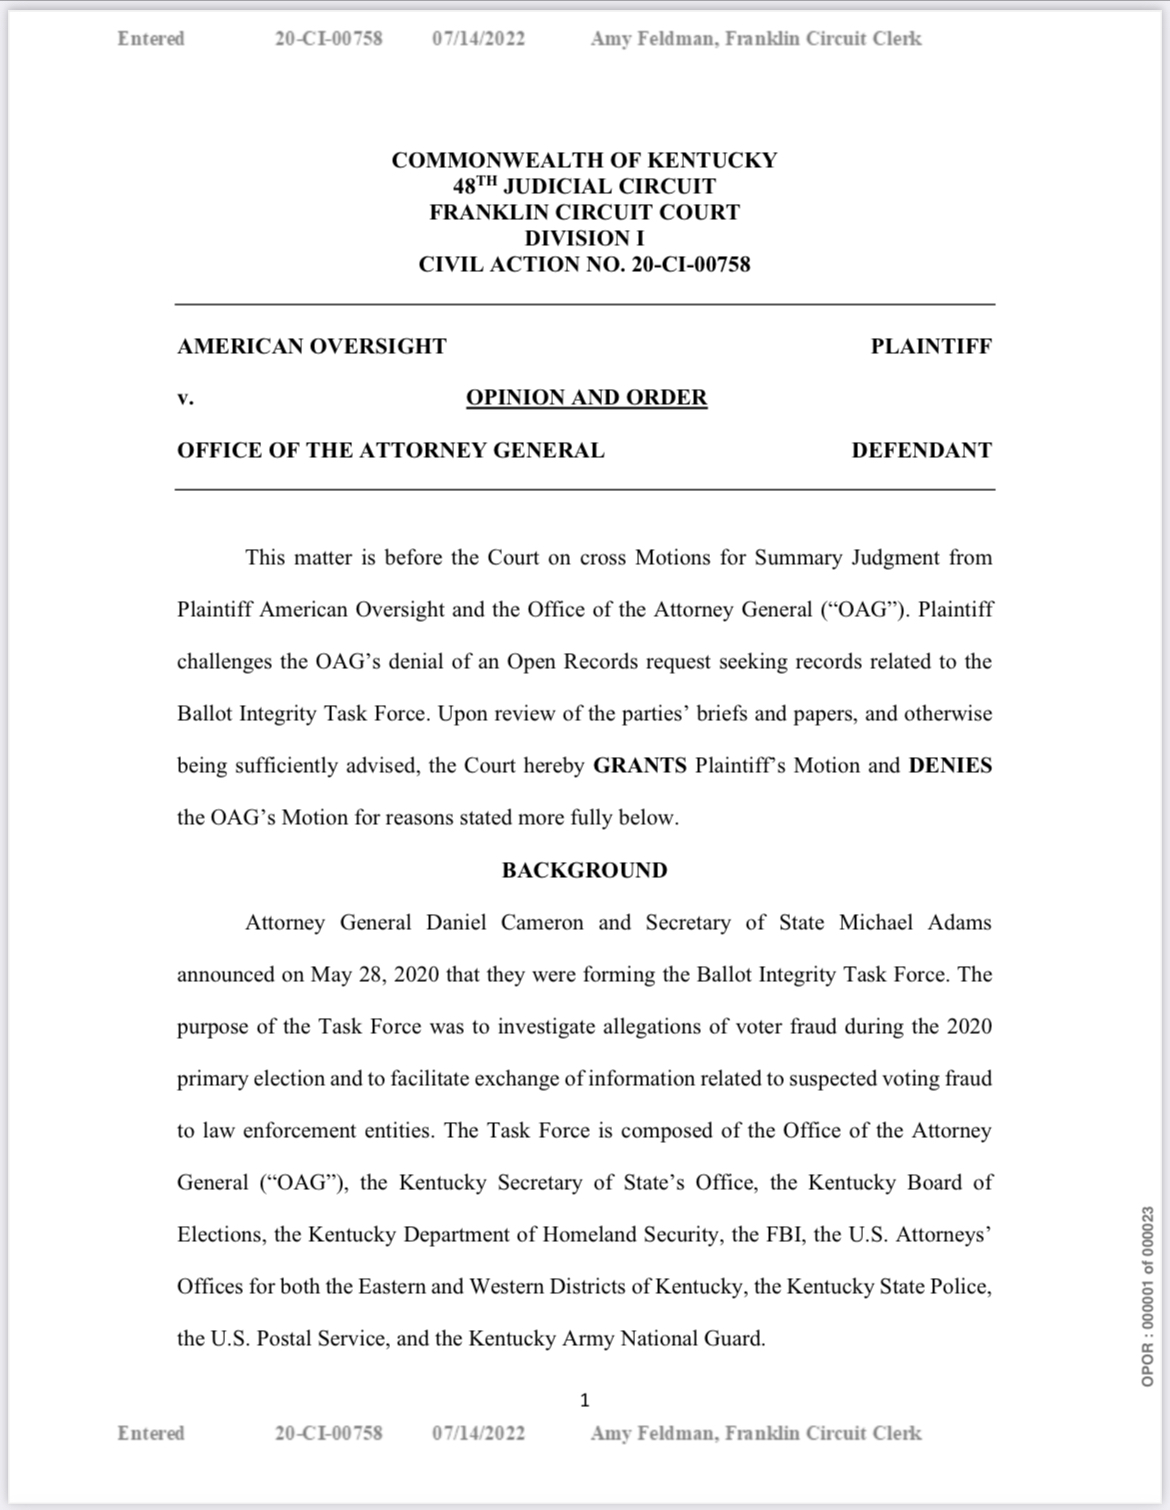 The first page of the Franklin Curcuit Court’s opinion in American Oversight v Office of the Attorney General 